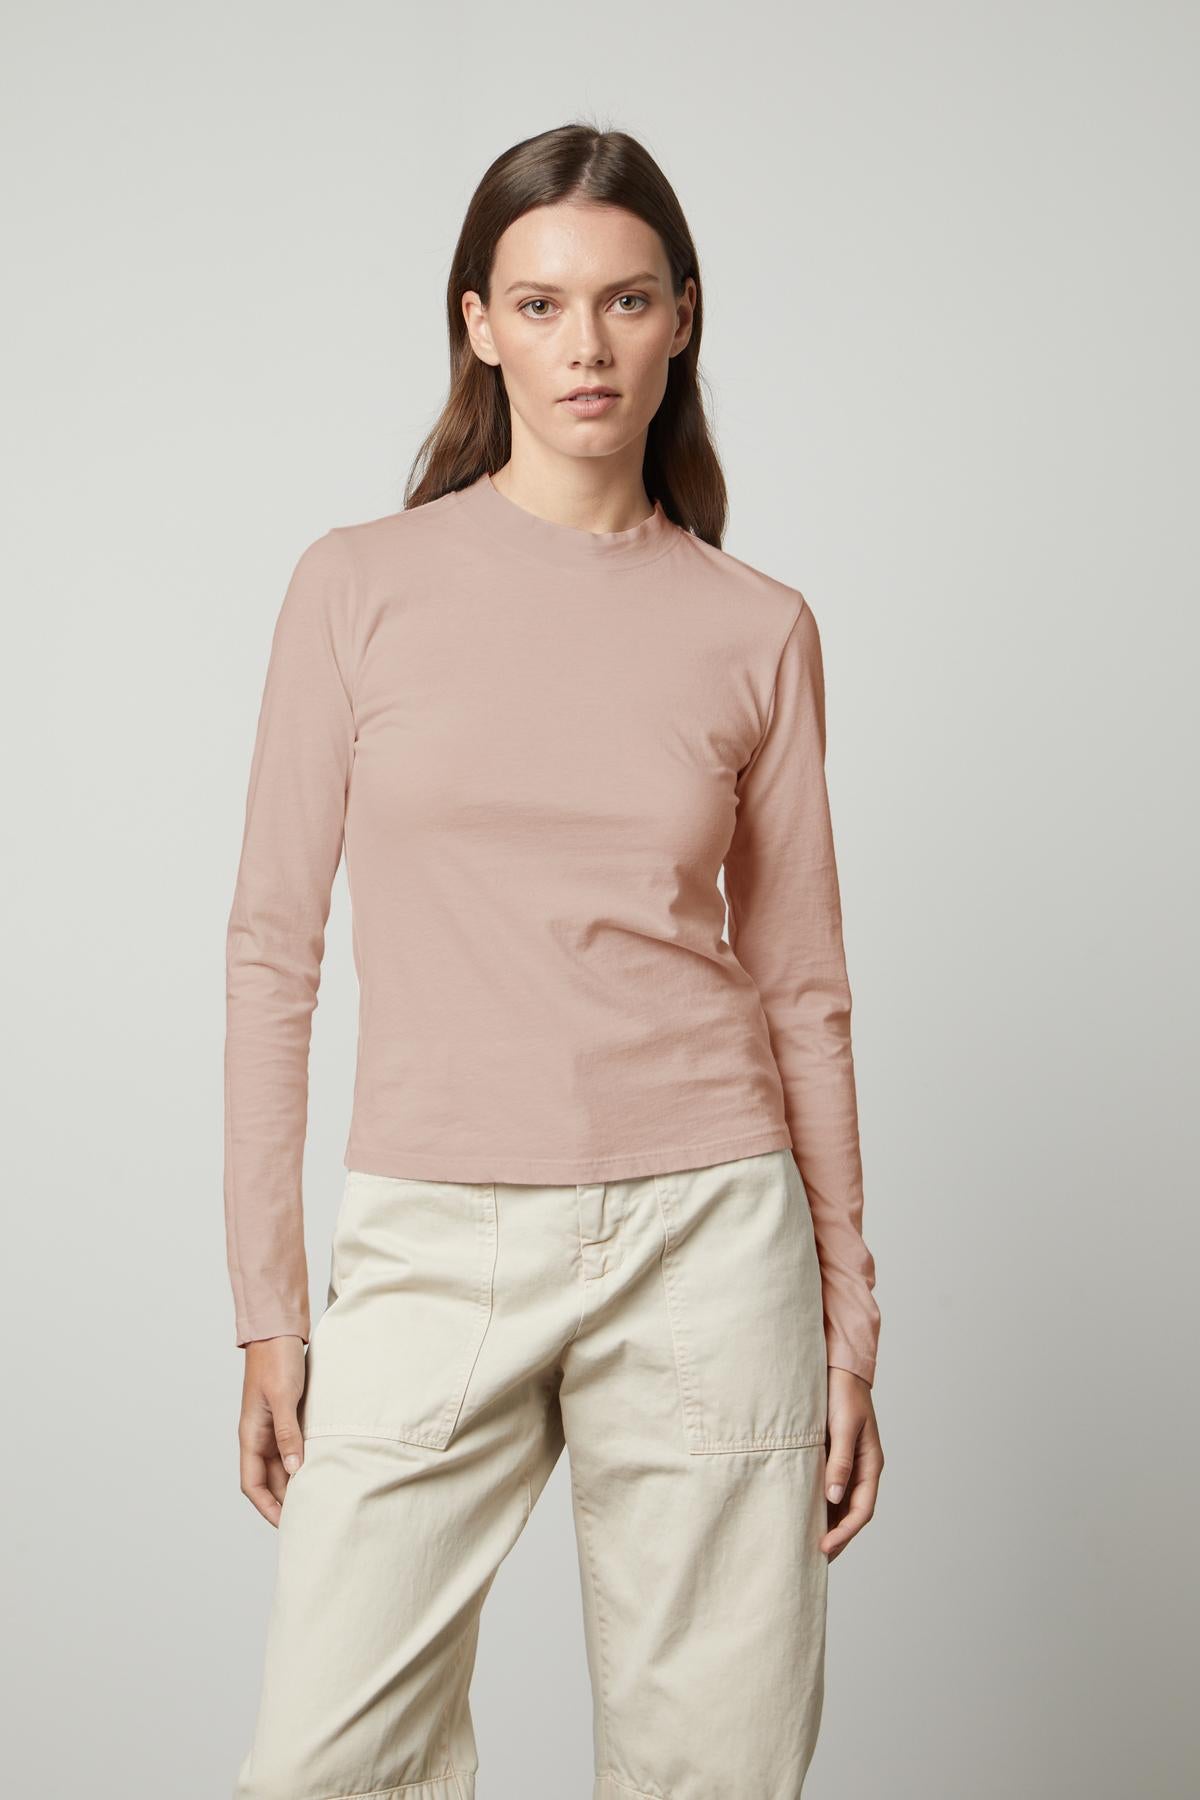 The model is wearing a LINNY MOCK NECK TEE made by Velvet by Graham & Spencer, a pink fitted long-sleeved t-shirt made of sueded jersey.-35660506759361